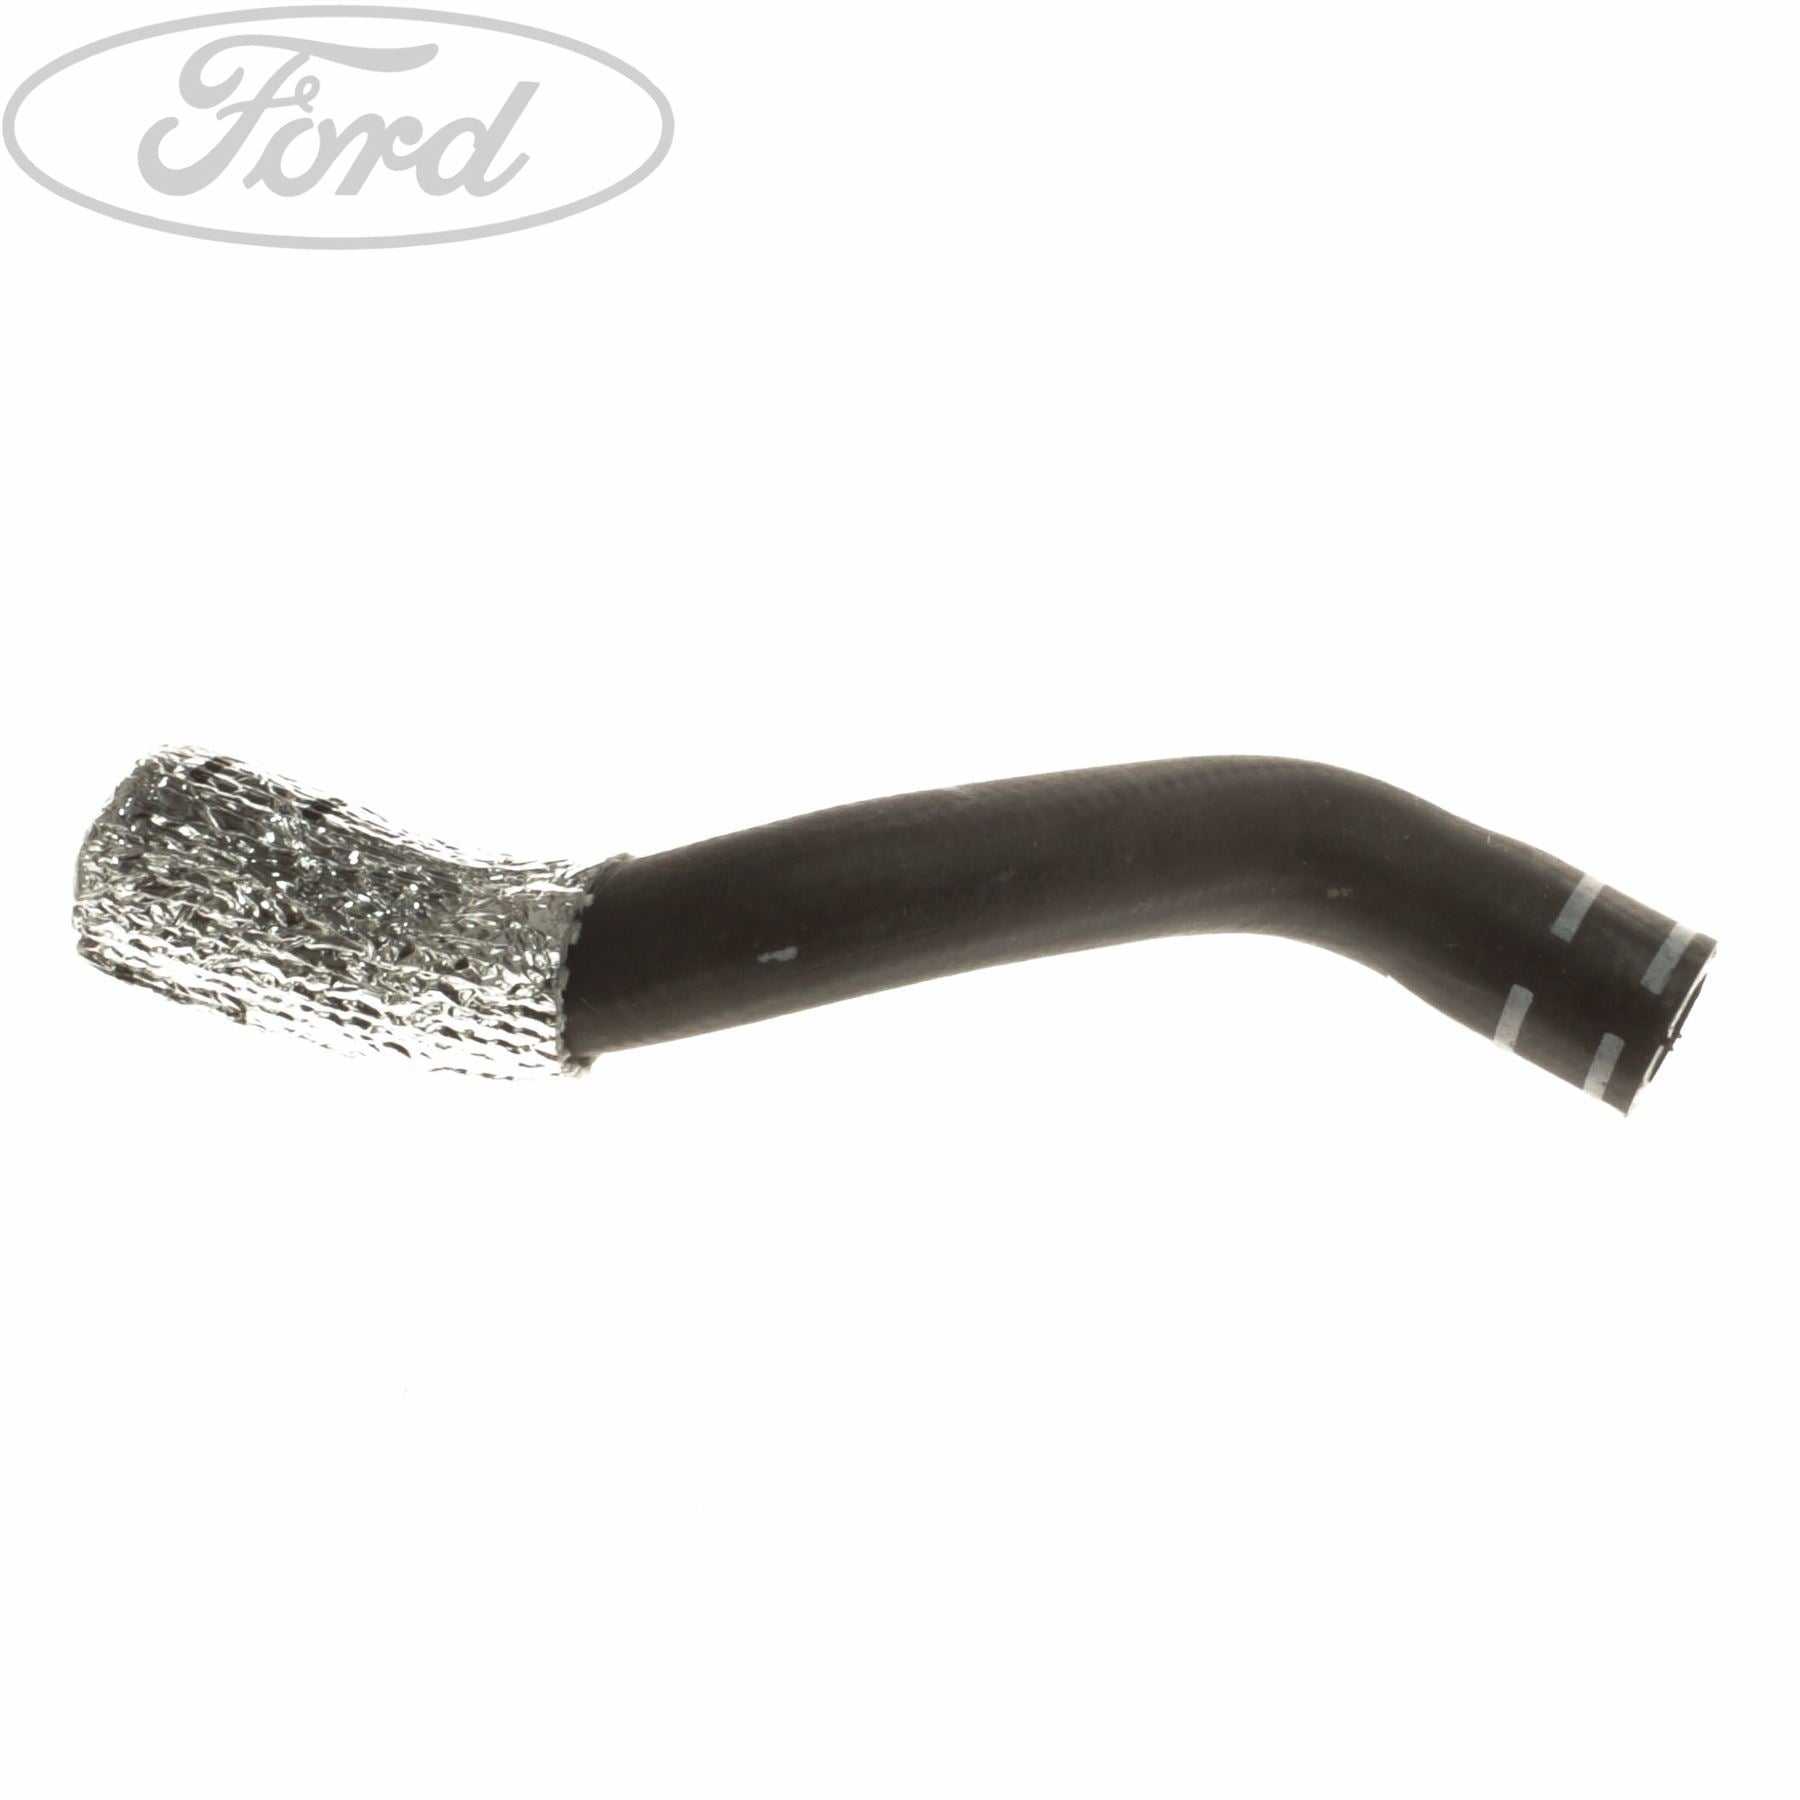 Ford, TURBOCHARGER CONNECTING HOSE